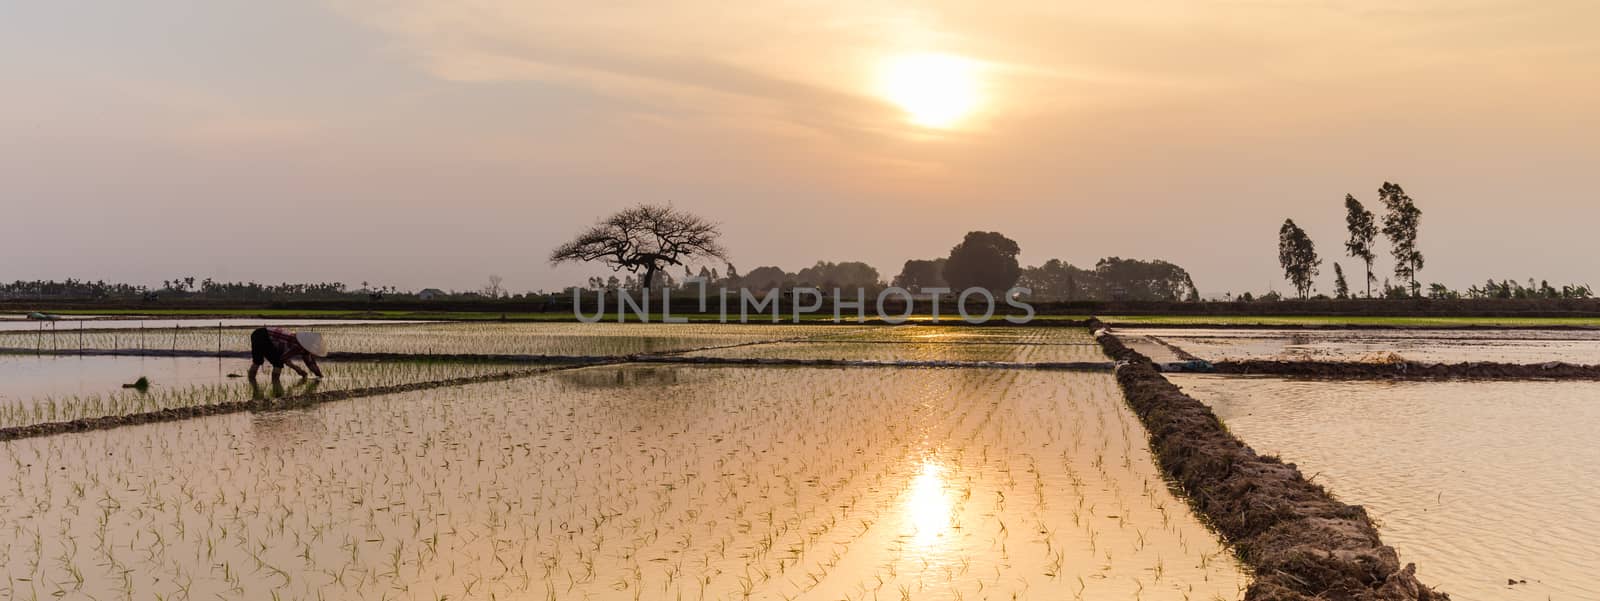 Rear view a female farmer planting on rice field at sunset in rural Hanoi, Vietnam. Young rice sprouts ready to growing. Organic paddy farmland, terminalia catappa or tropical almond is in distance